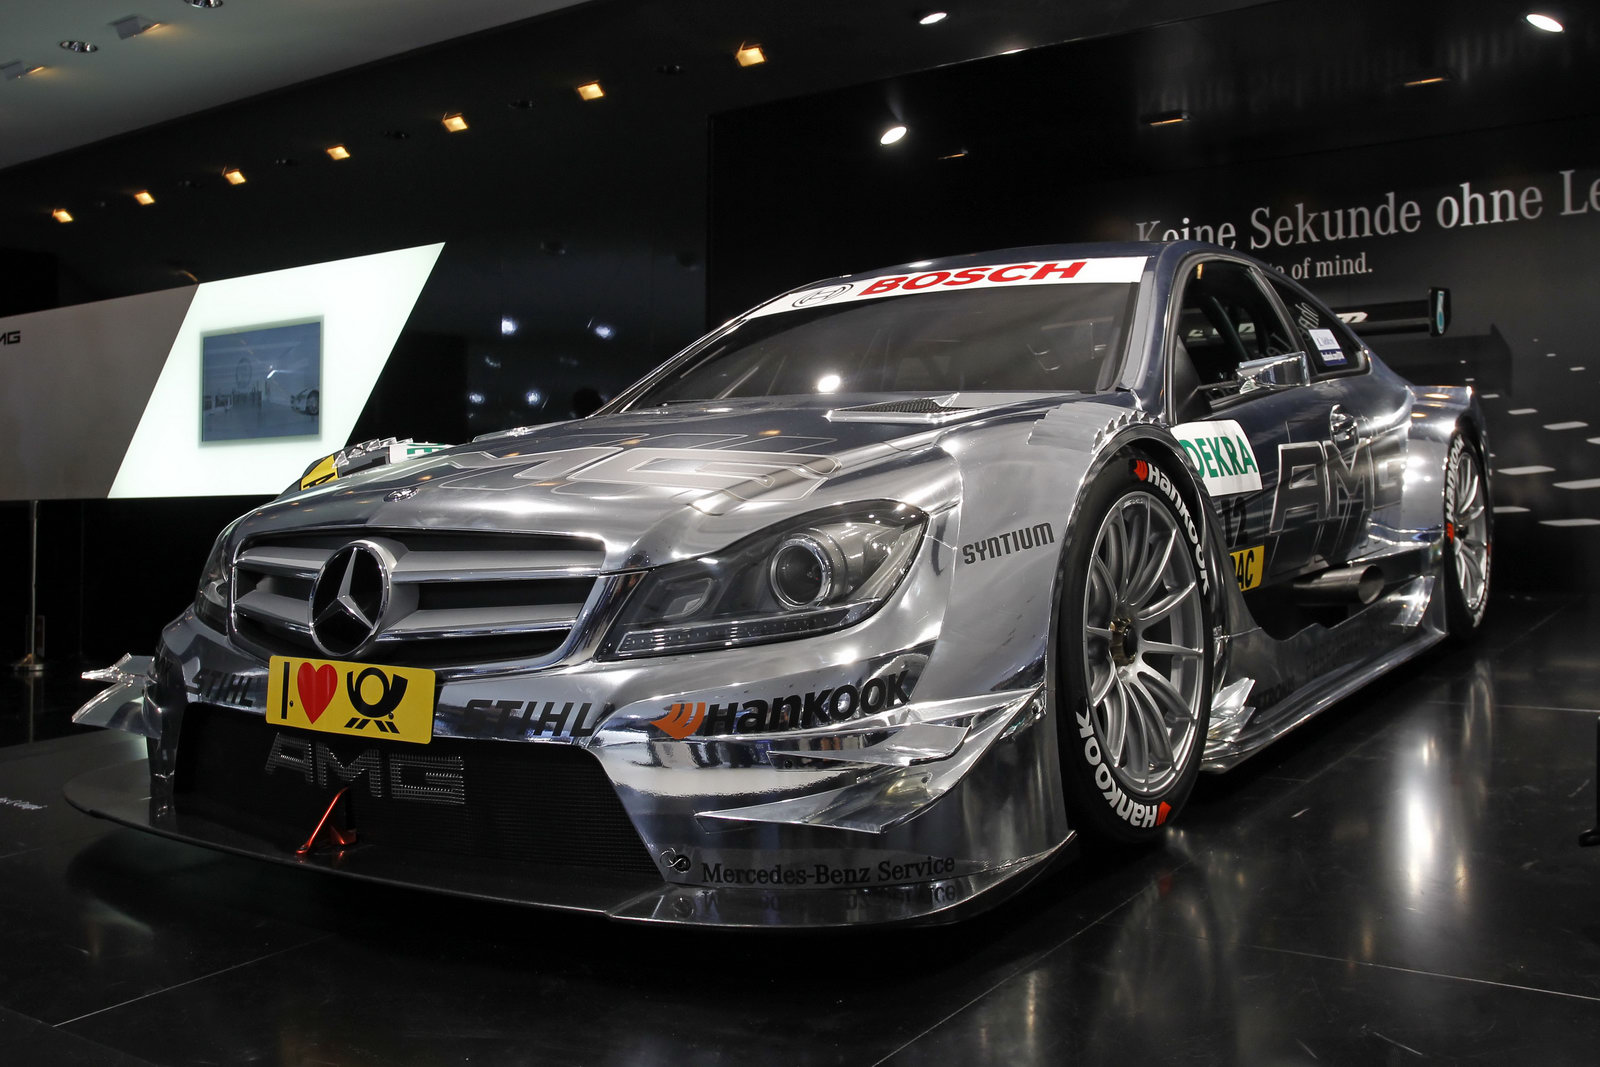 AMG Mercedes C-Class - the most successful car in DTM history